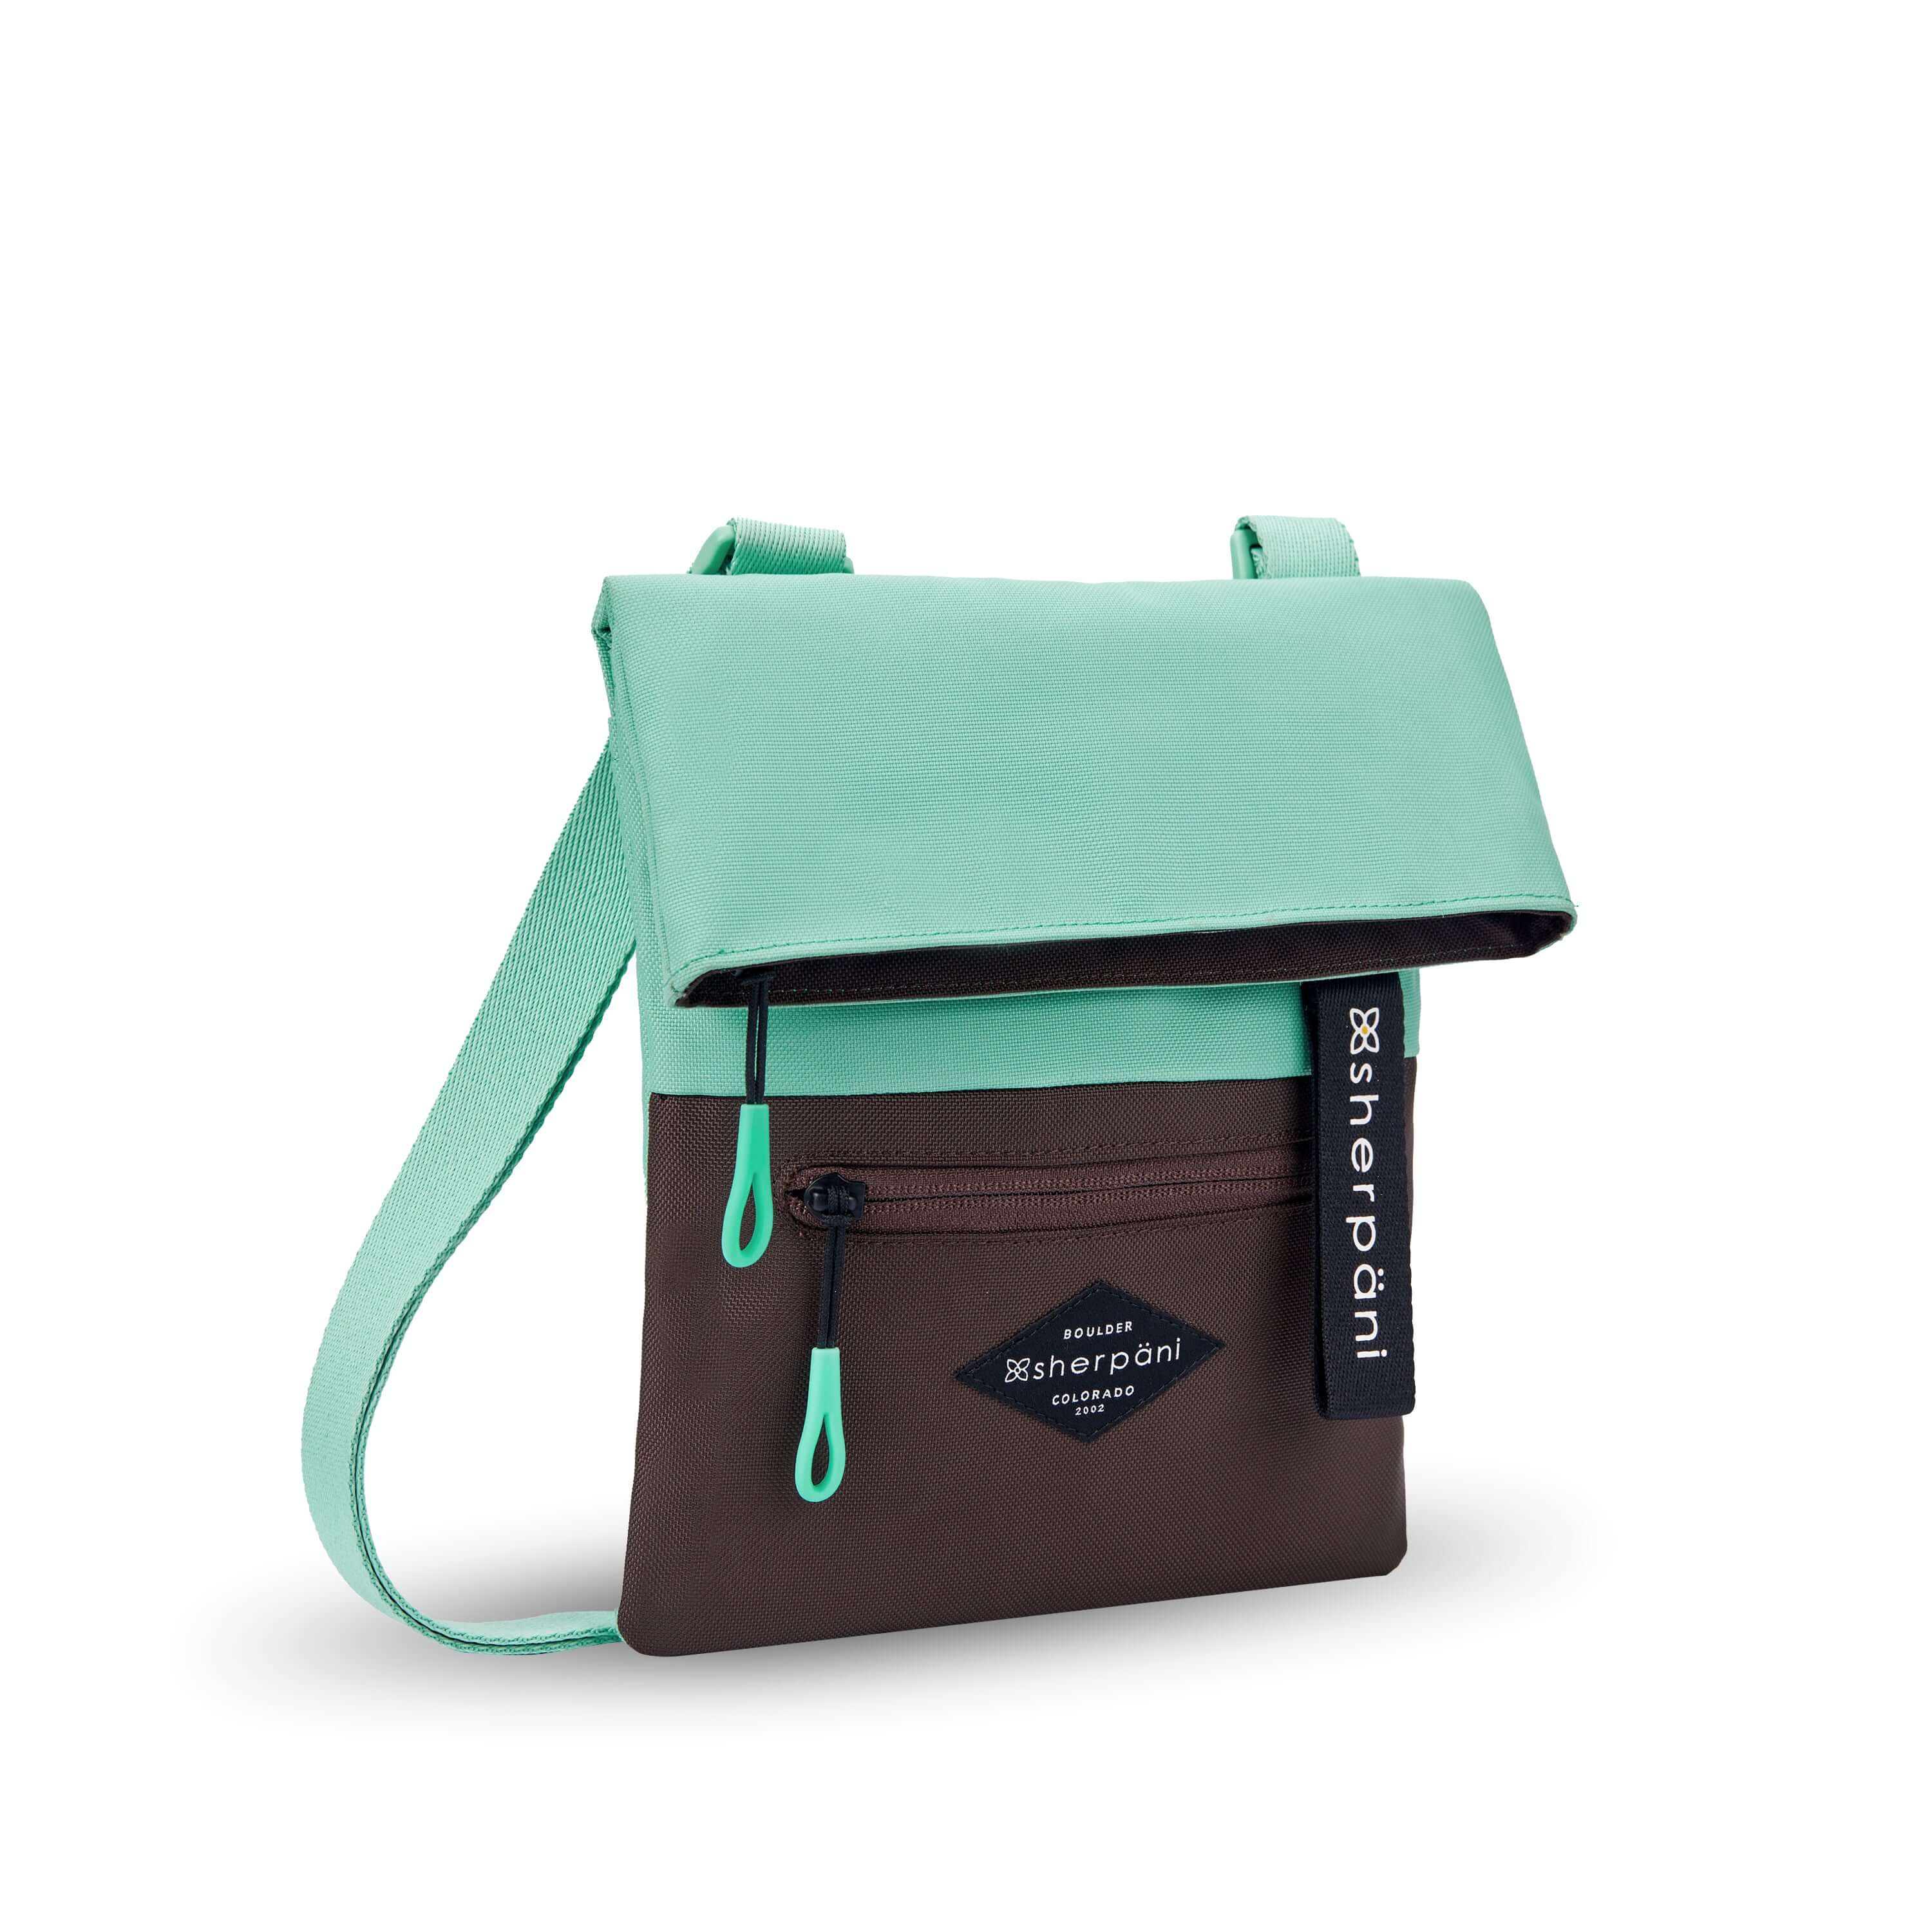 Angled front view of Sherpani crossbody, the Pica in Seagreen. The bag is two toned: the top half is light green and the bottom half is brown. There is an external zipper pocket on the front panel. Easy-pull zippers are accented in light green. The top of the bag folds over creating a signature look. A branded Sherpani keychain is clipped to the upper right corner. The bag has an adjustable crossbody strap. #color_seagreen